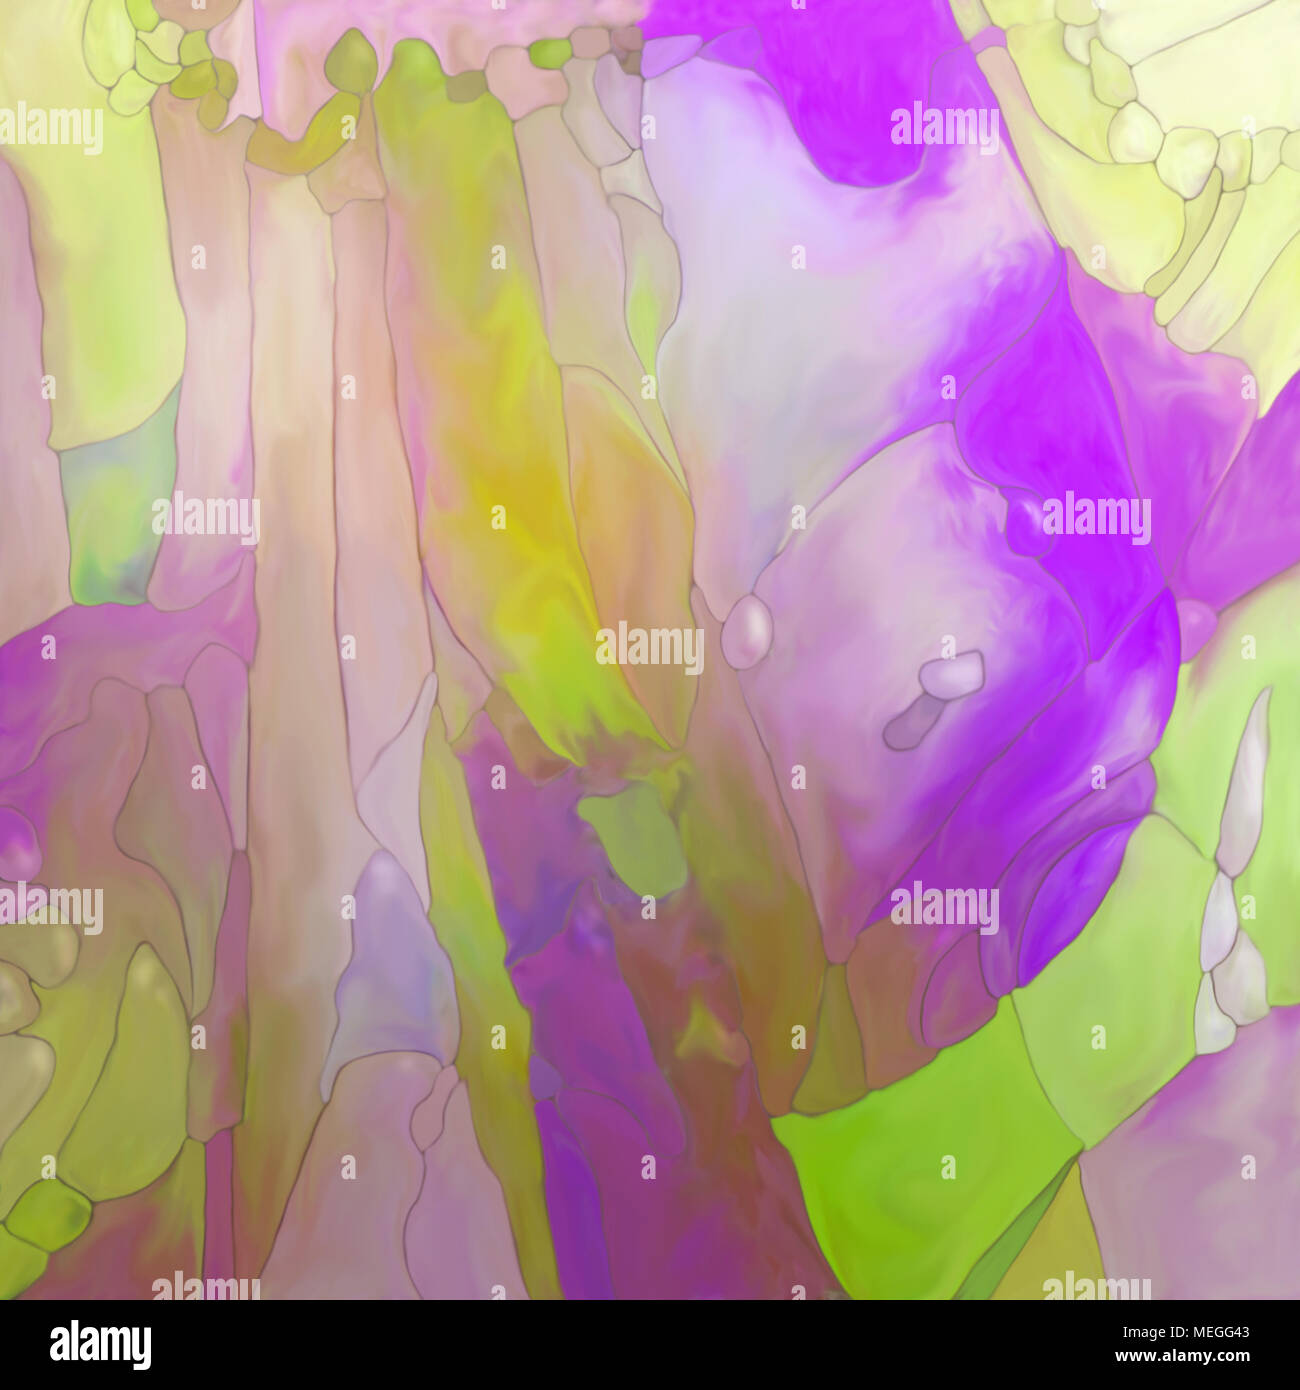 Abstract digital painted fantasy figure landscape or background texture with lines and fields in purple and green Stock Photo